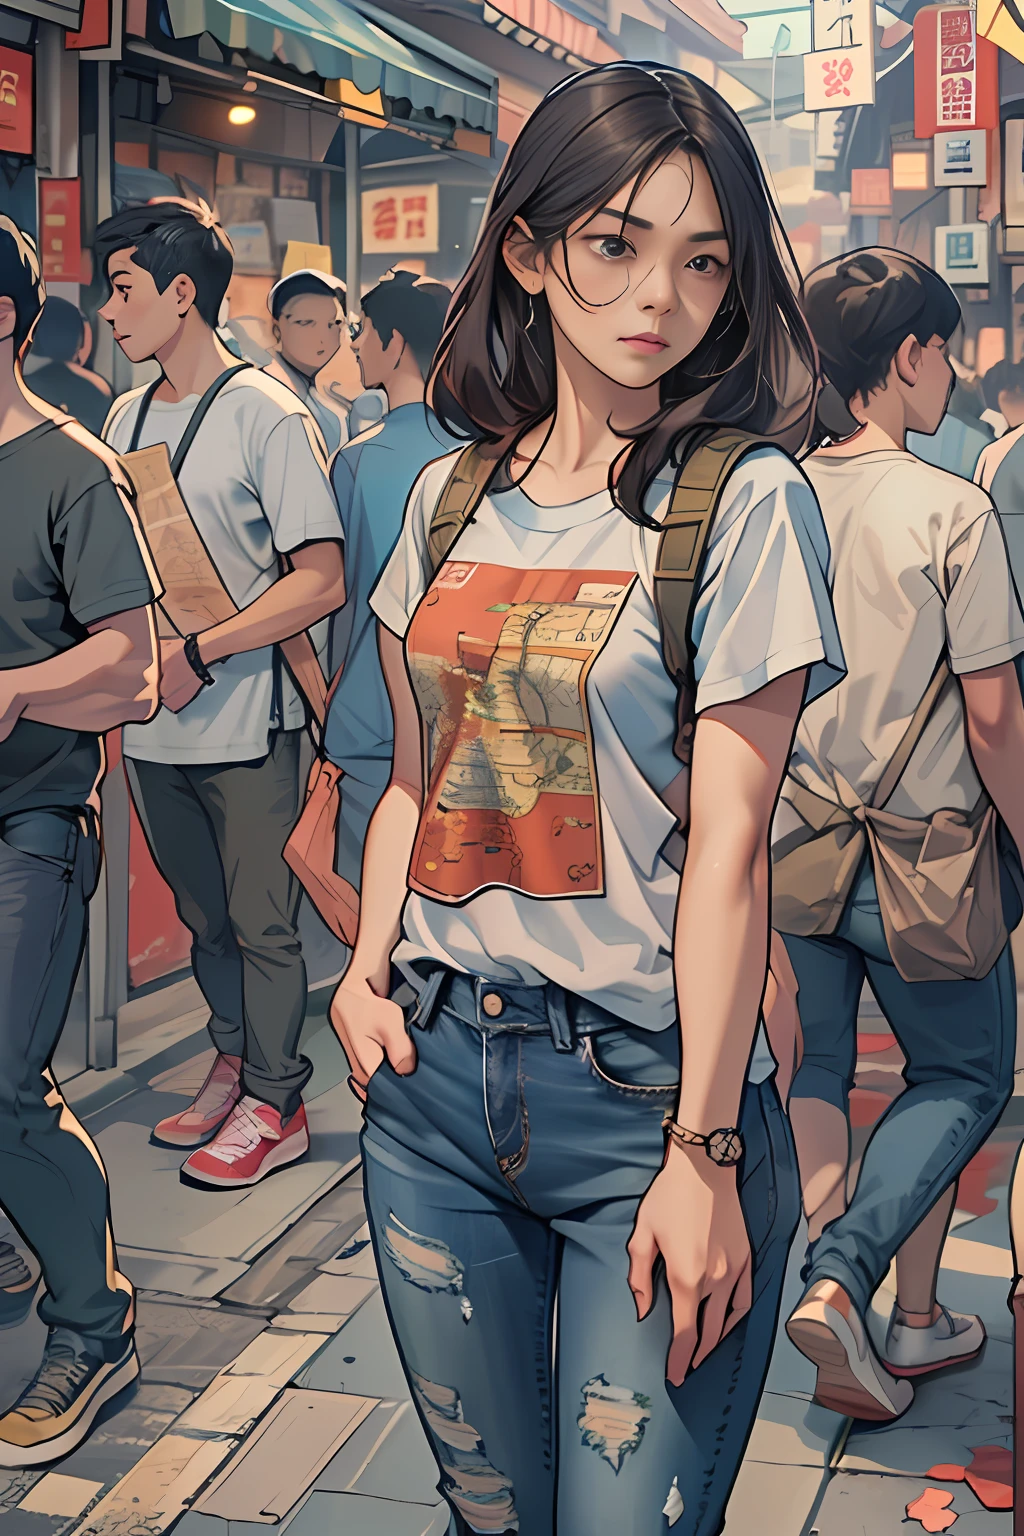 A young woman named Yang Feiyue standing on a busy street, Contemporary Rough T-Shirt and Jeanap at hand, Surrounded by stalls, With a hint of disappointment and confusion on her face,  ,In the style of the star art group Xing, 32K, Best Quality, masutepiece, Super Detail, high details